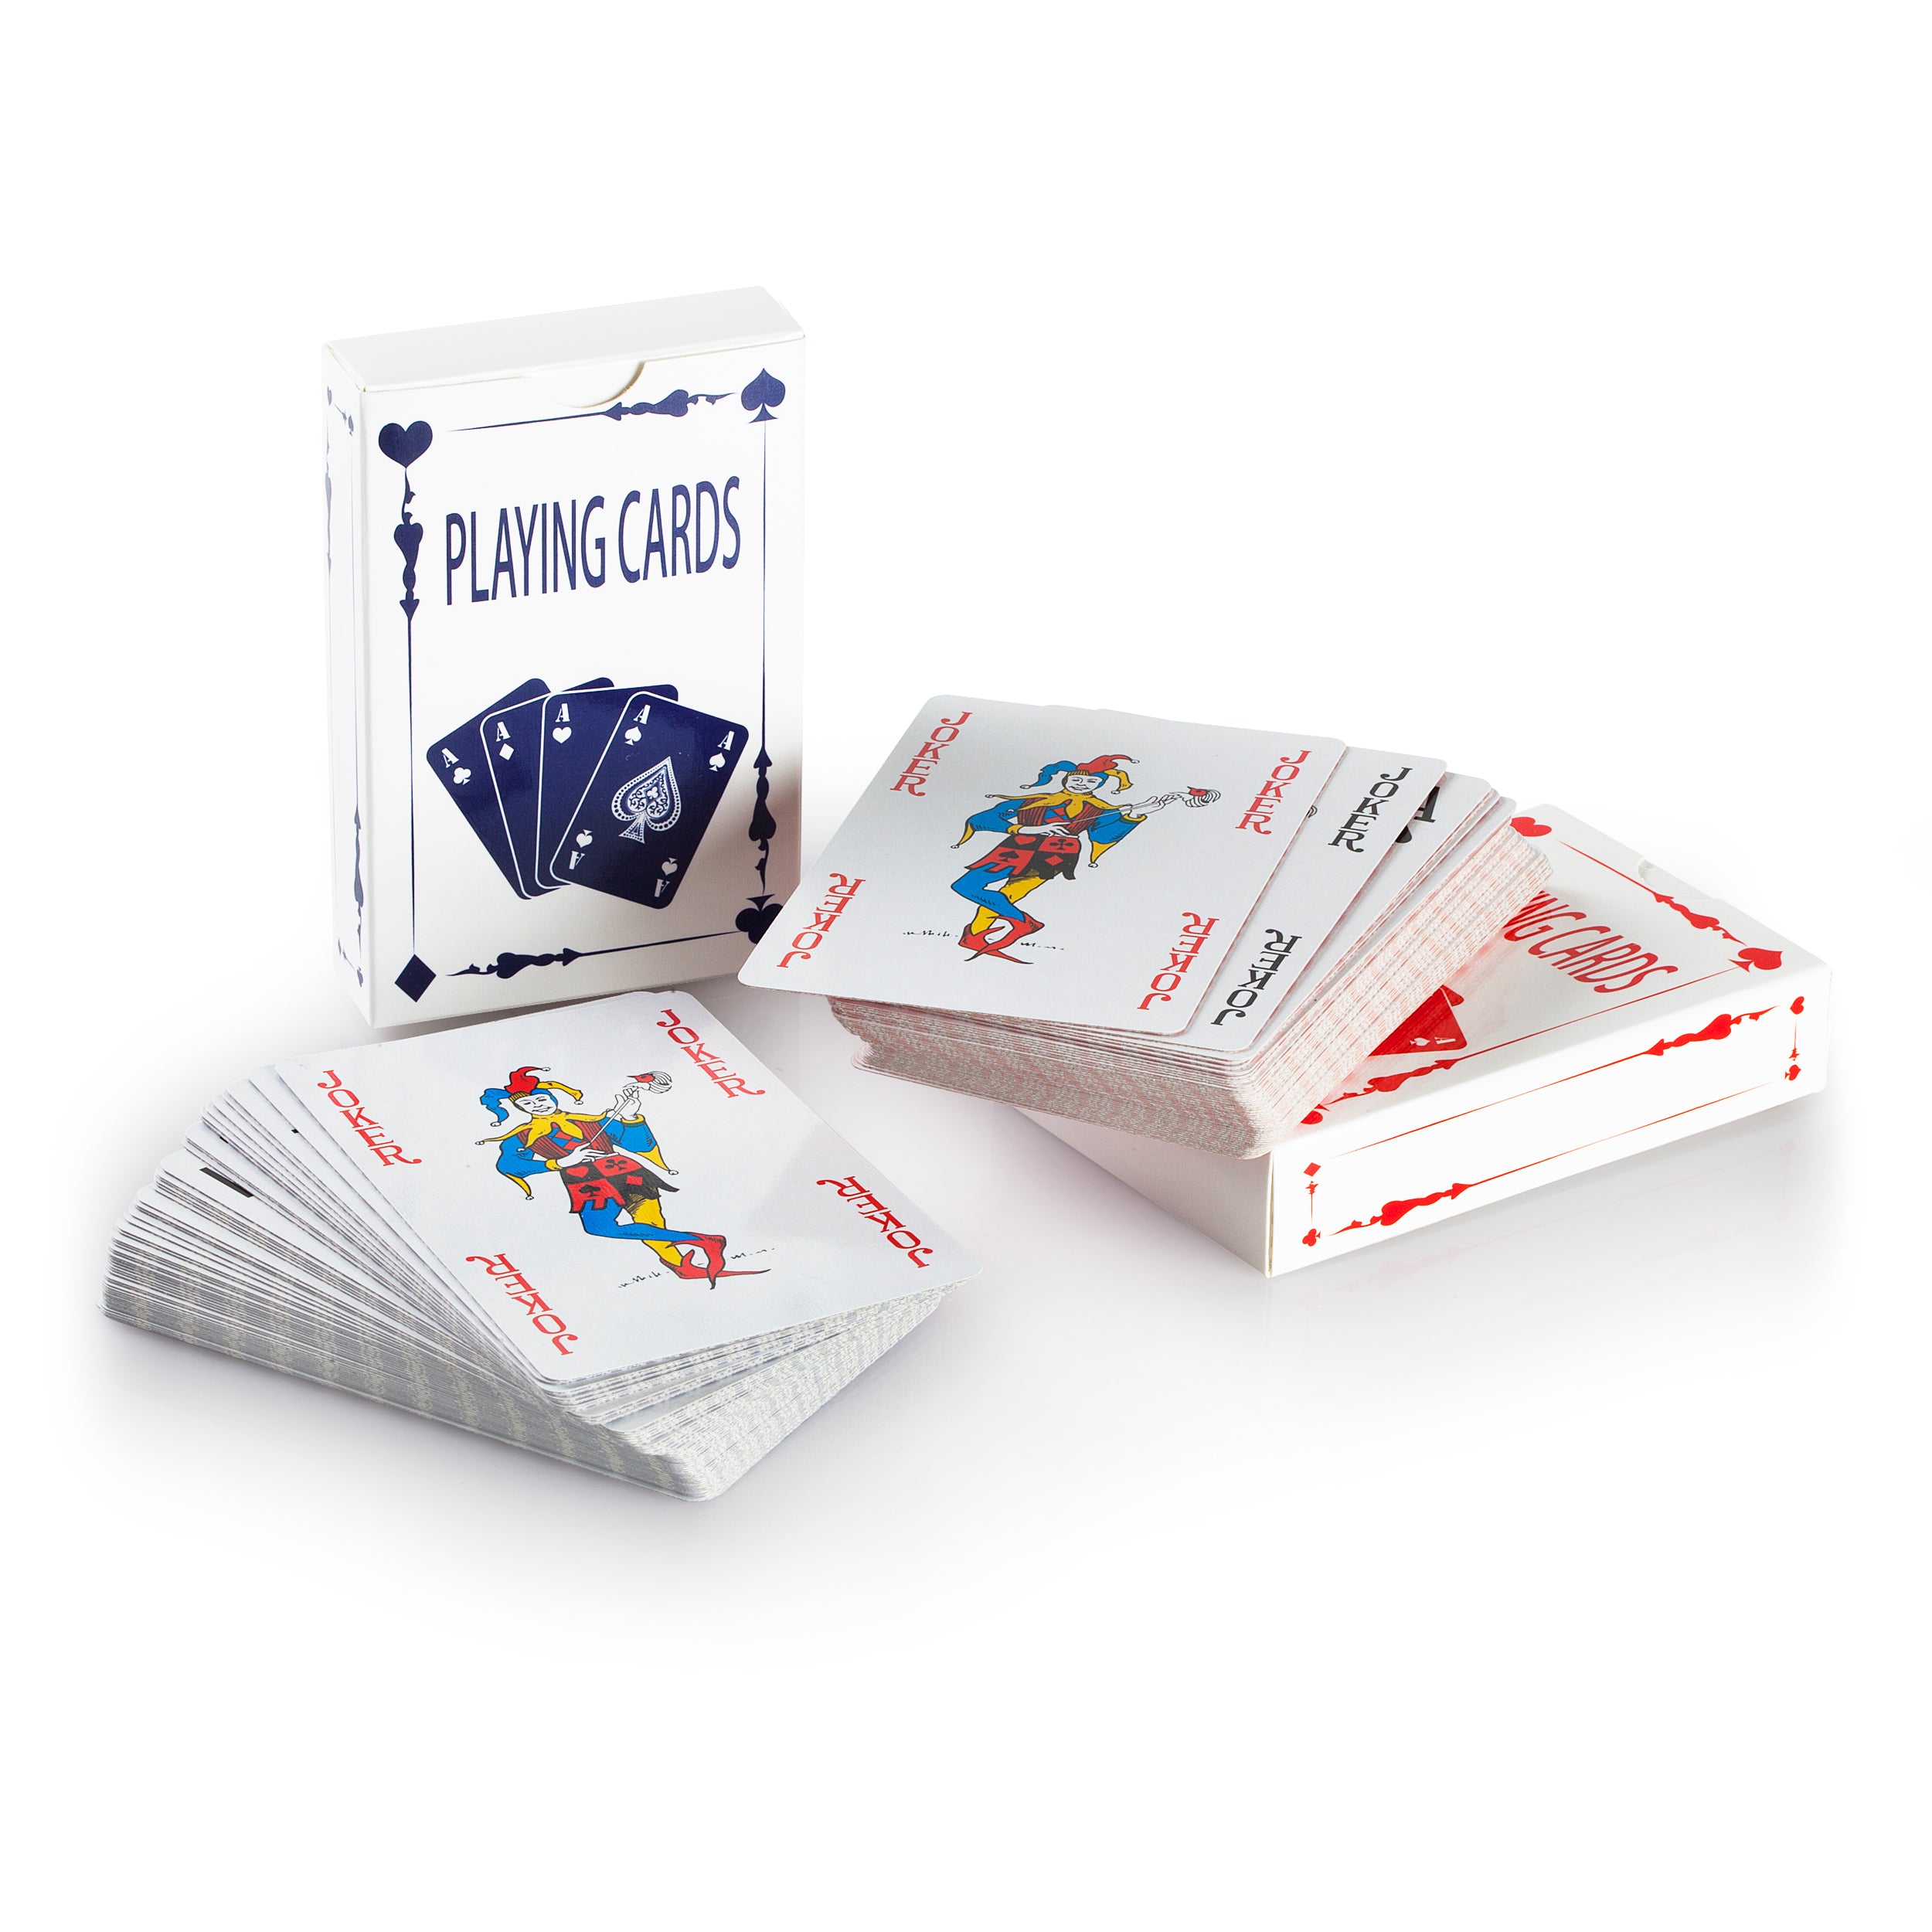 Playing Cards - Standard 52 Card Deck (10 Pack)